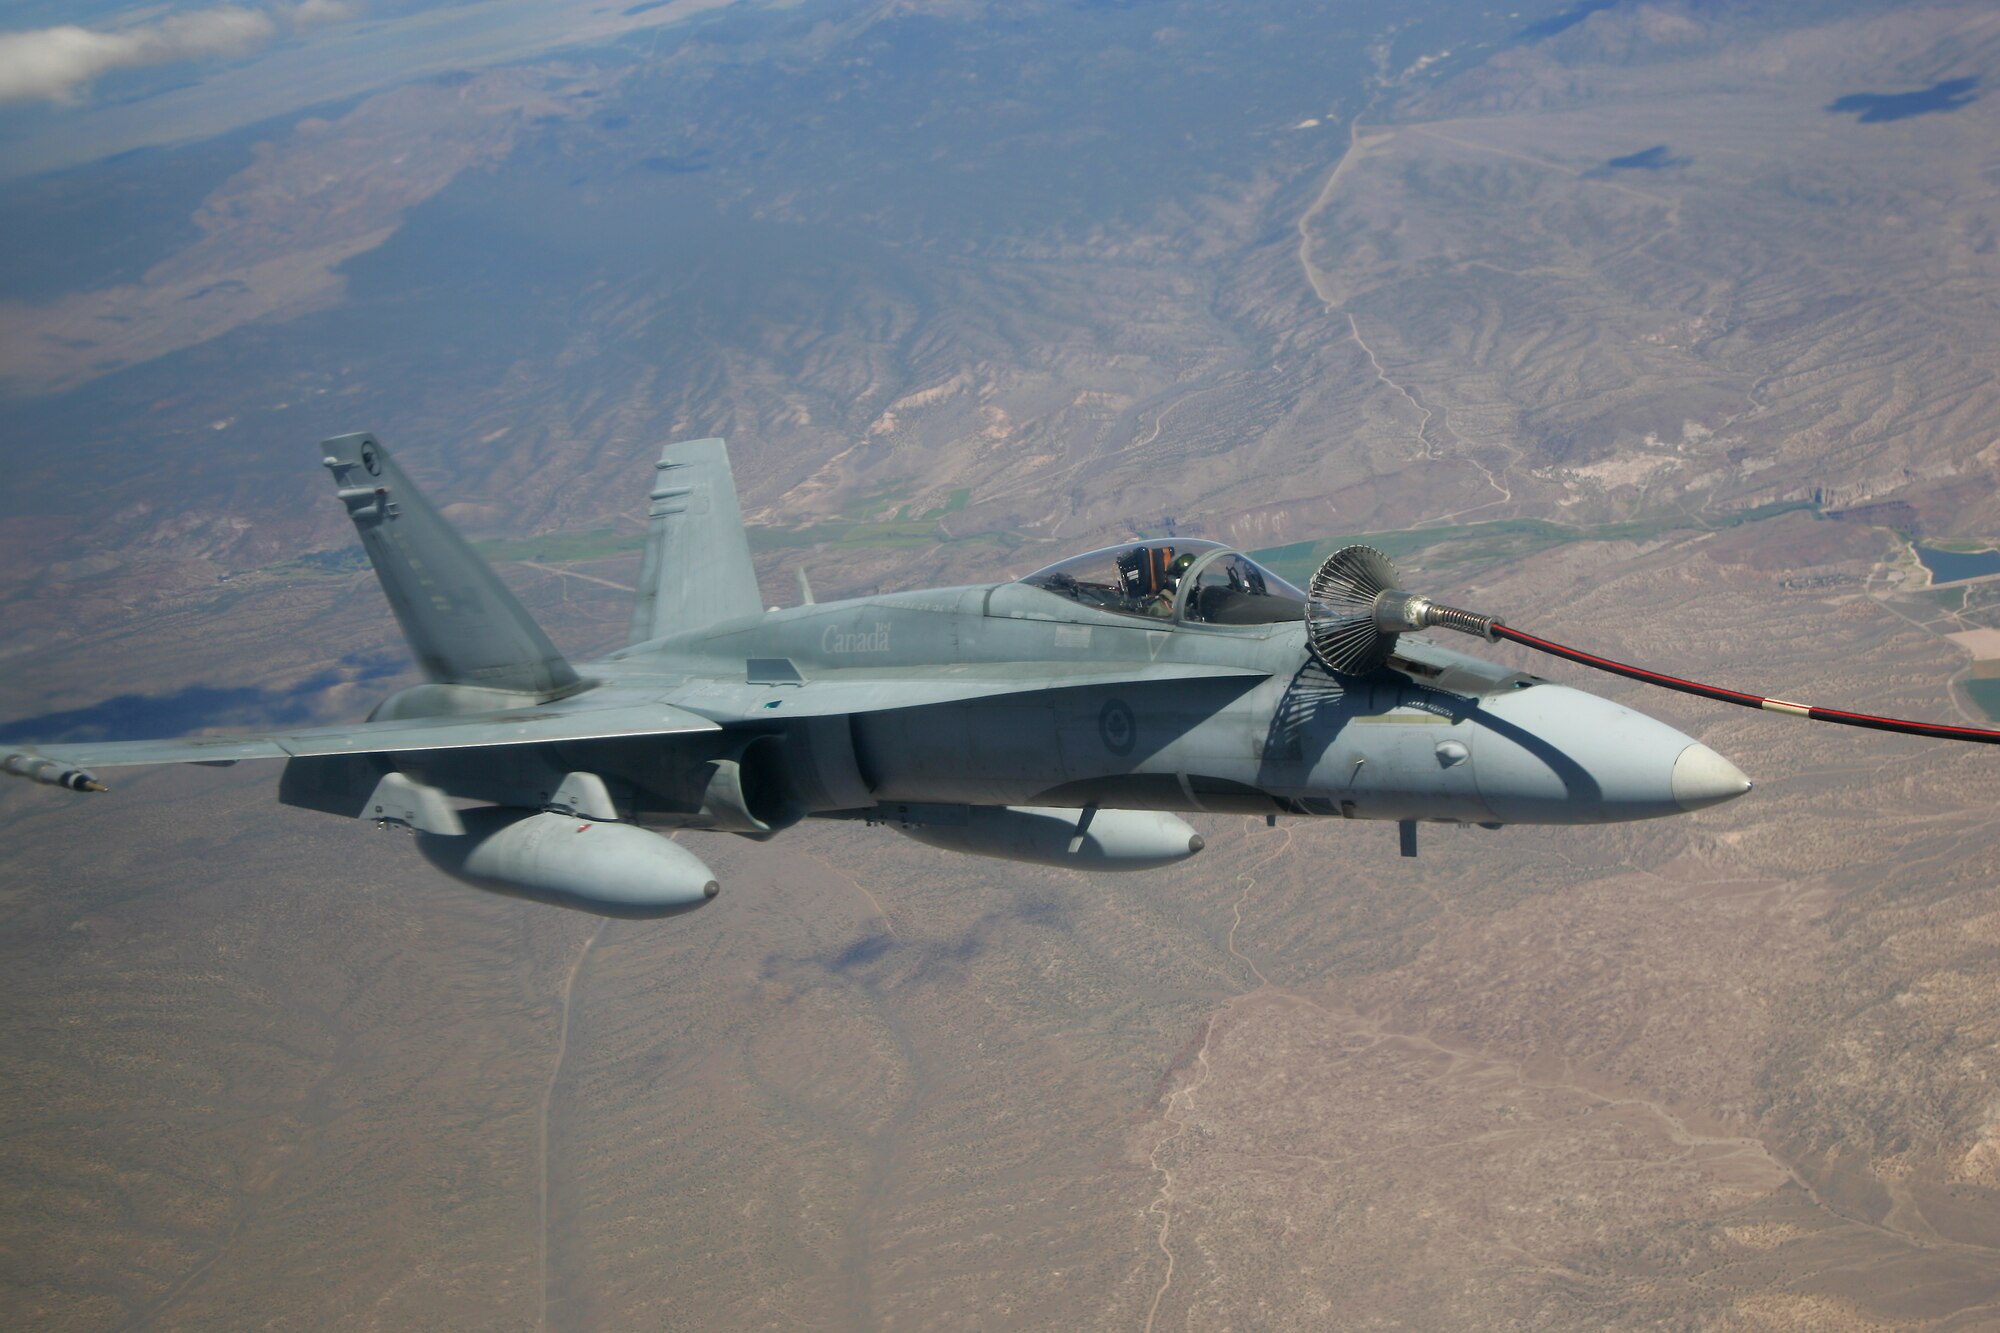 A CF-18M from the 409th Tactical Fighter Squadron, Cold Lake, Canada, takes on fuel Aug. 15 from a CC-130T tanker, 17th Wing, 435th Squadron, Winnipeg, Canada. Canadian air forces are taking part in the first two-week period of exercise Red Flag, which ends 18 Aug. The CF-18s are performing air-to-ground strike operations during Red Flag, which pits friendly forces against Air Force Aggressor F-15s and F-16s over the 12,000-square-mile Nevada Test and Training Range Complex. (Photo courtesy Paul Ridgway, Typhire Photography)